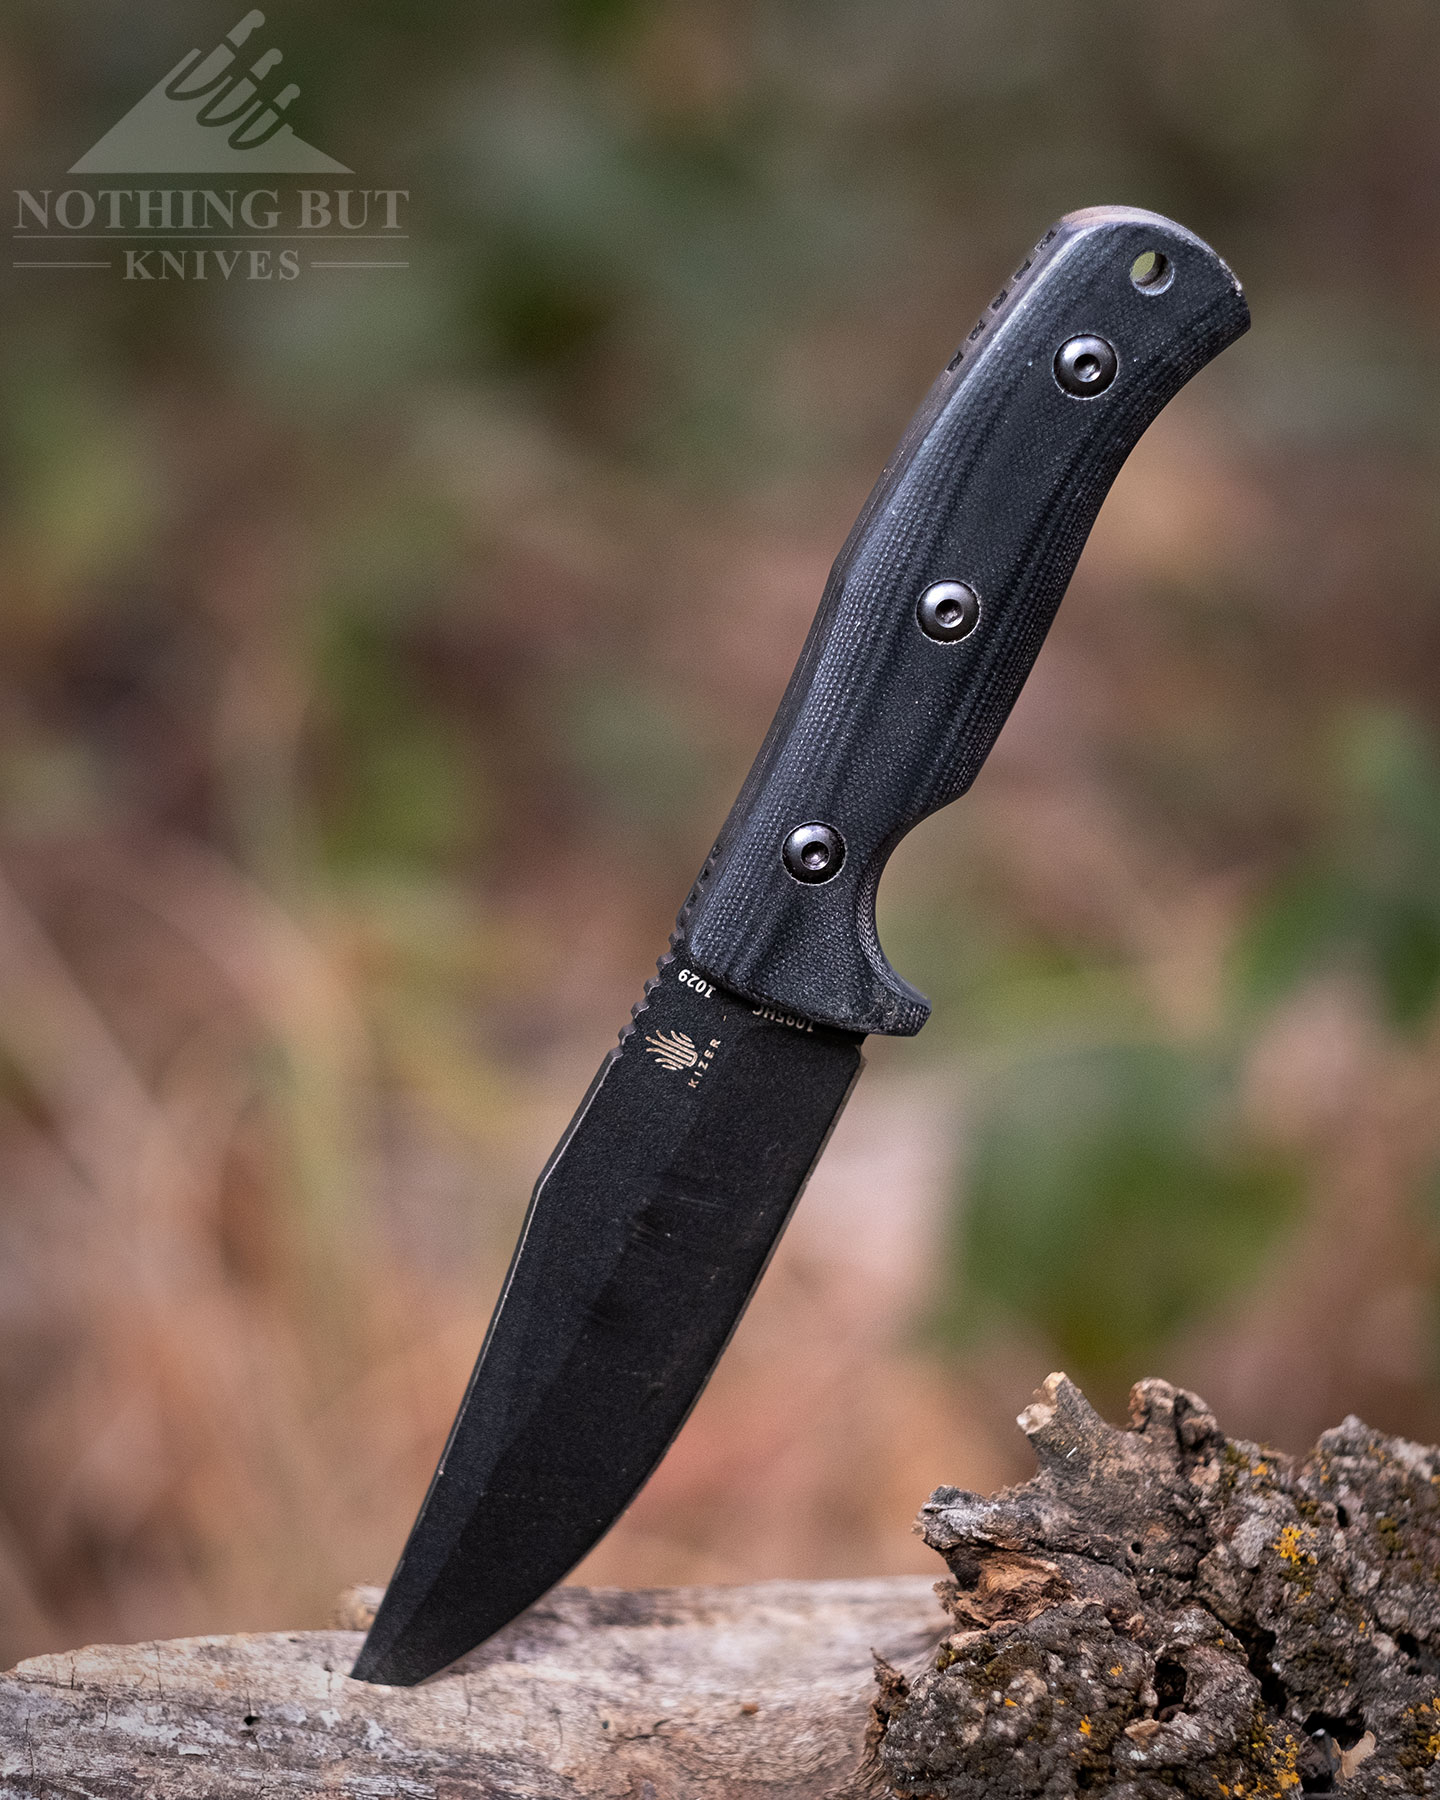 The Kize Little River Bowie has been discontinued, but there is always a chance it mat be brought back.